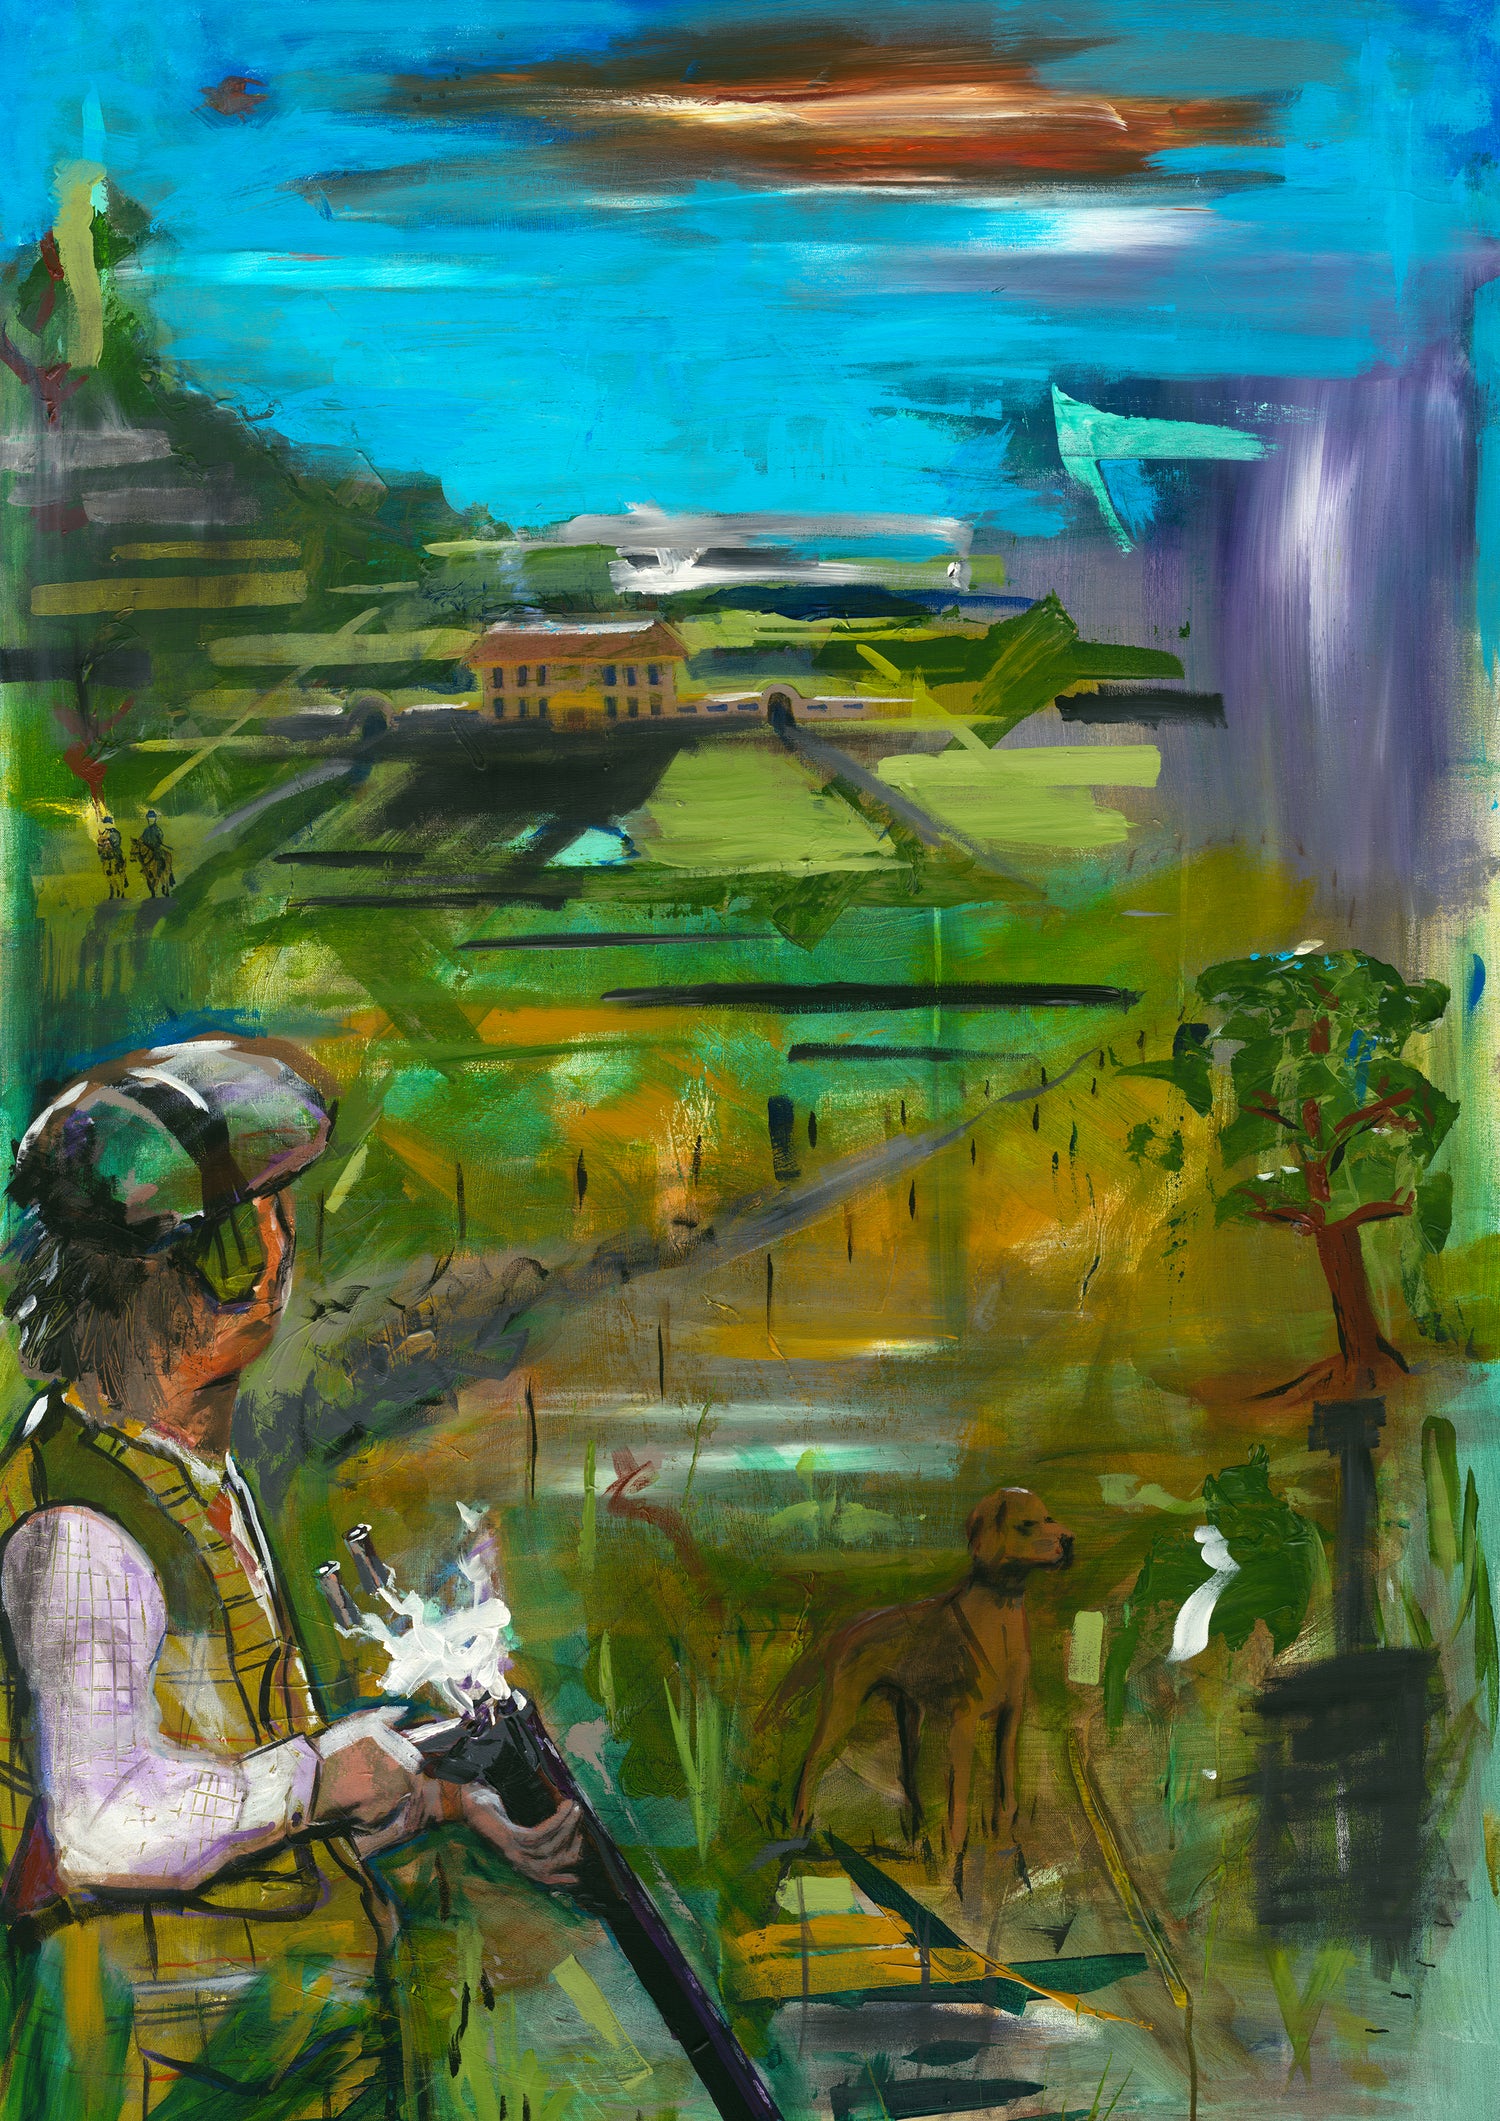 A close up of limited edition print titled ‘Countryside’. It features a rural scene of a man hunting in the countryside, holding a gun and accompanied by a dog. A house can be seen in the distance, surrounded by abstract fields and trees. 